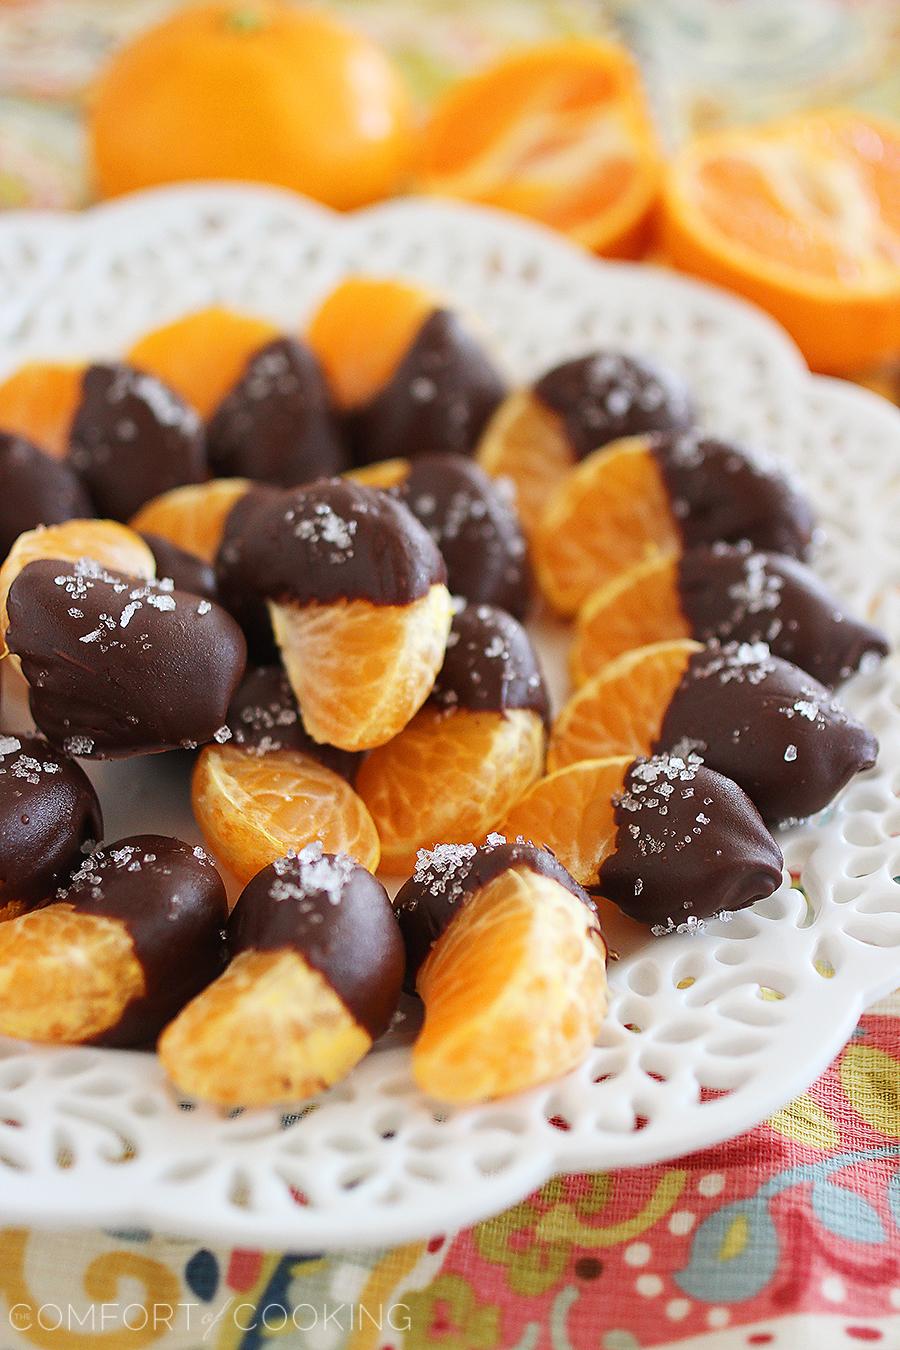 Chocolate Dipped Clementines with Sea Salt